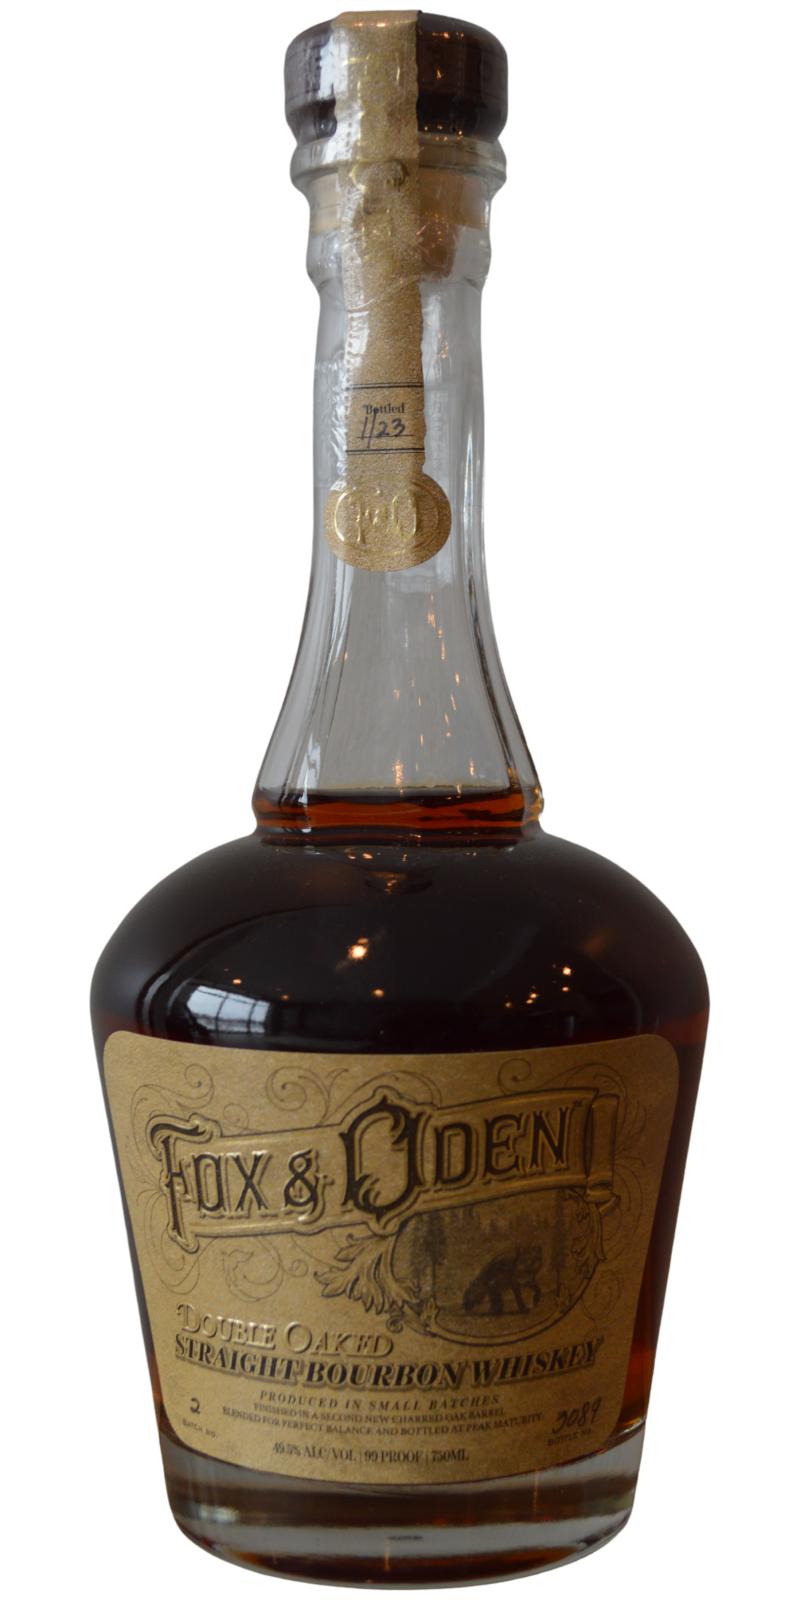 Fox & Oden Double Oaked Straight Bourbon Whiskey